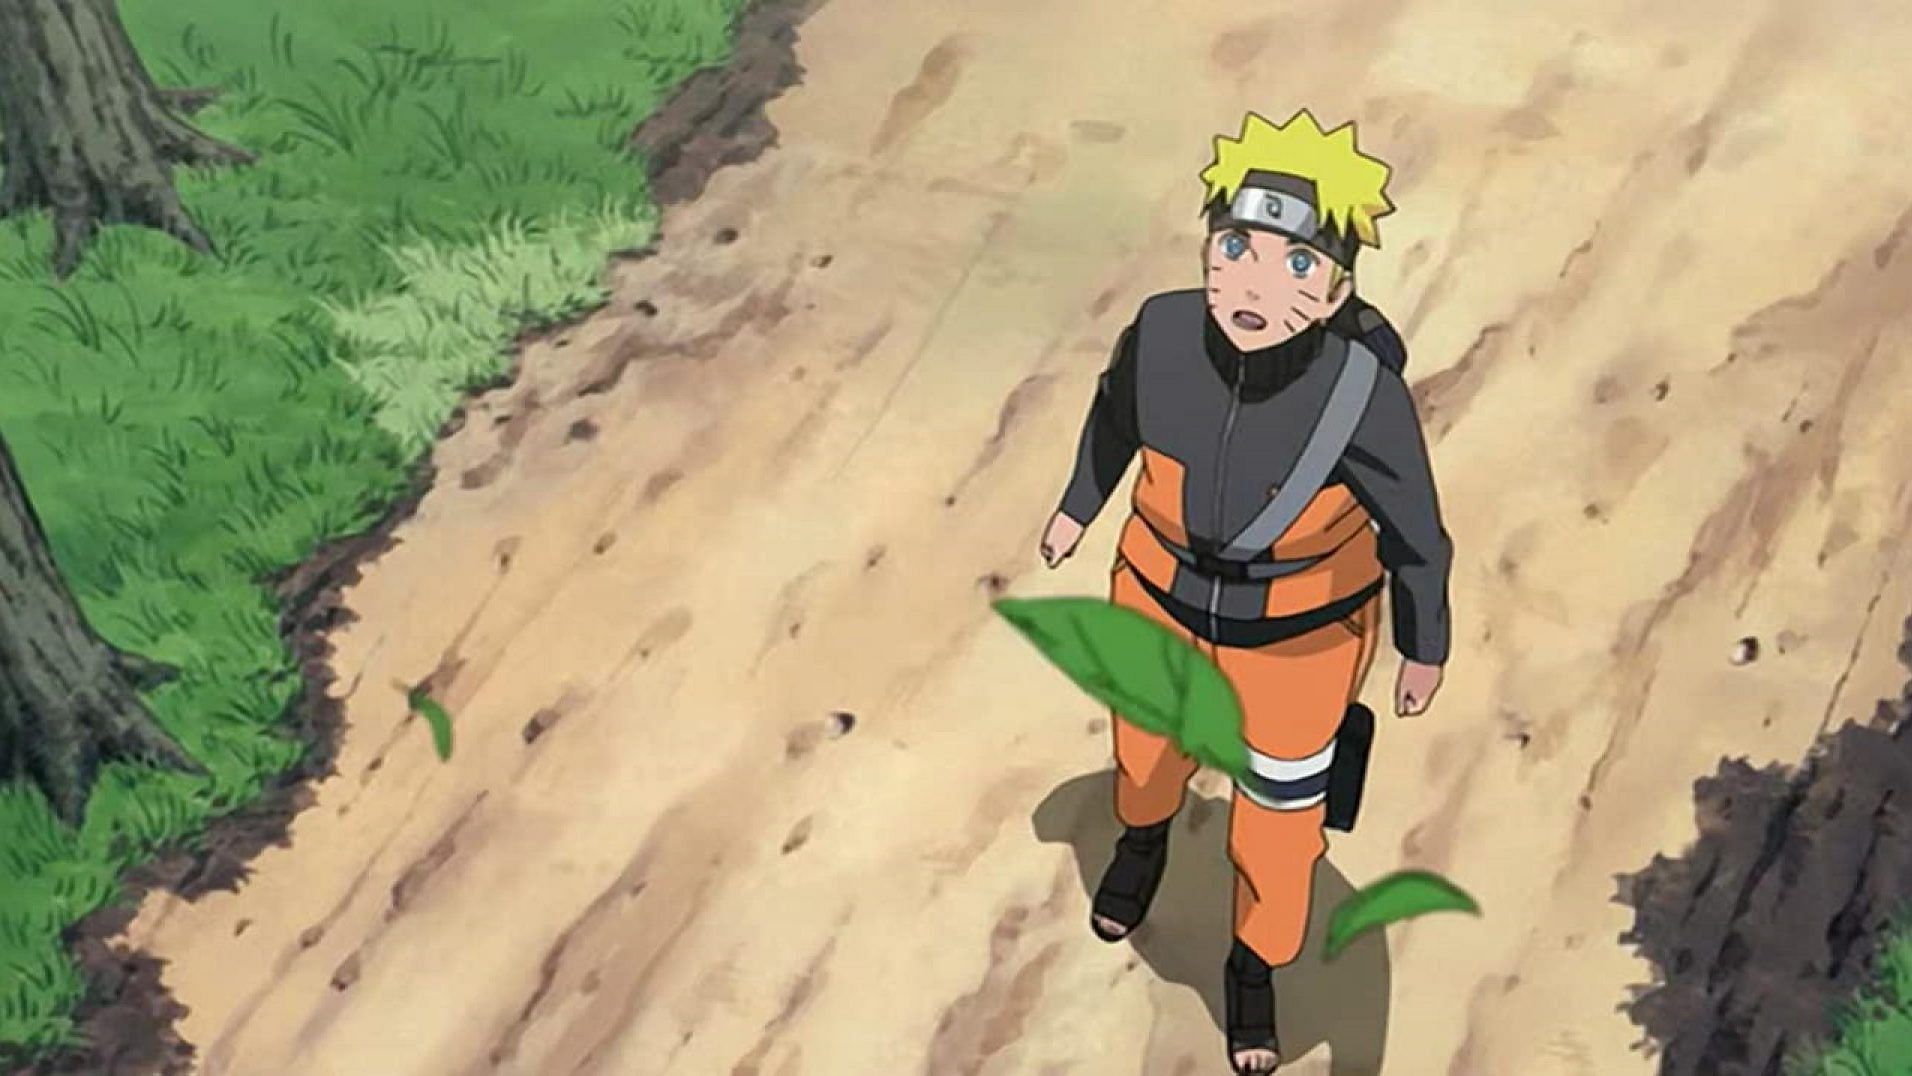 10 best Naruto Uzumaki quotes that no one can forget